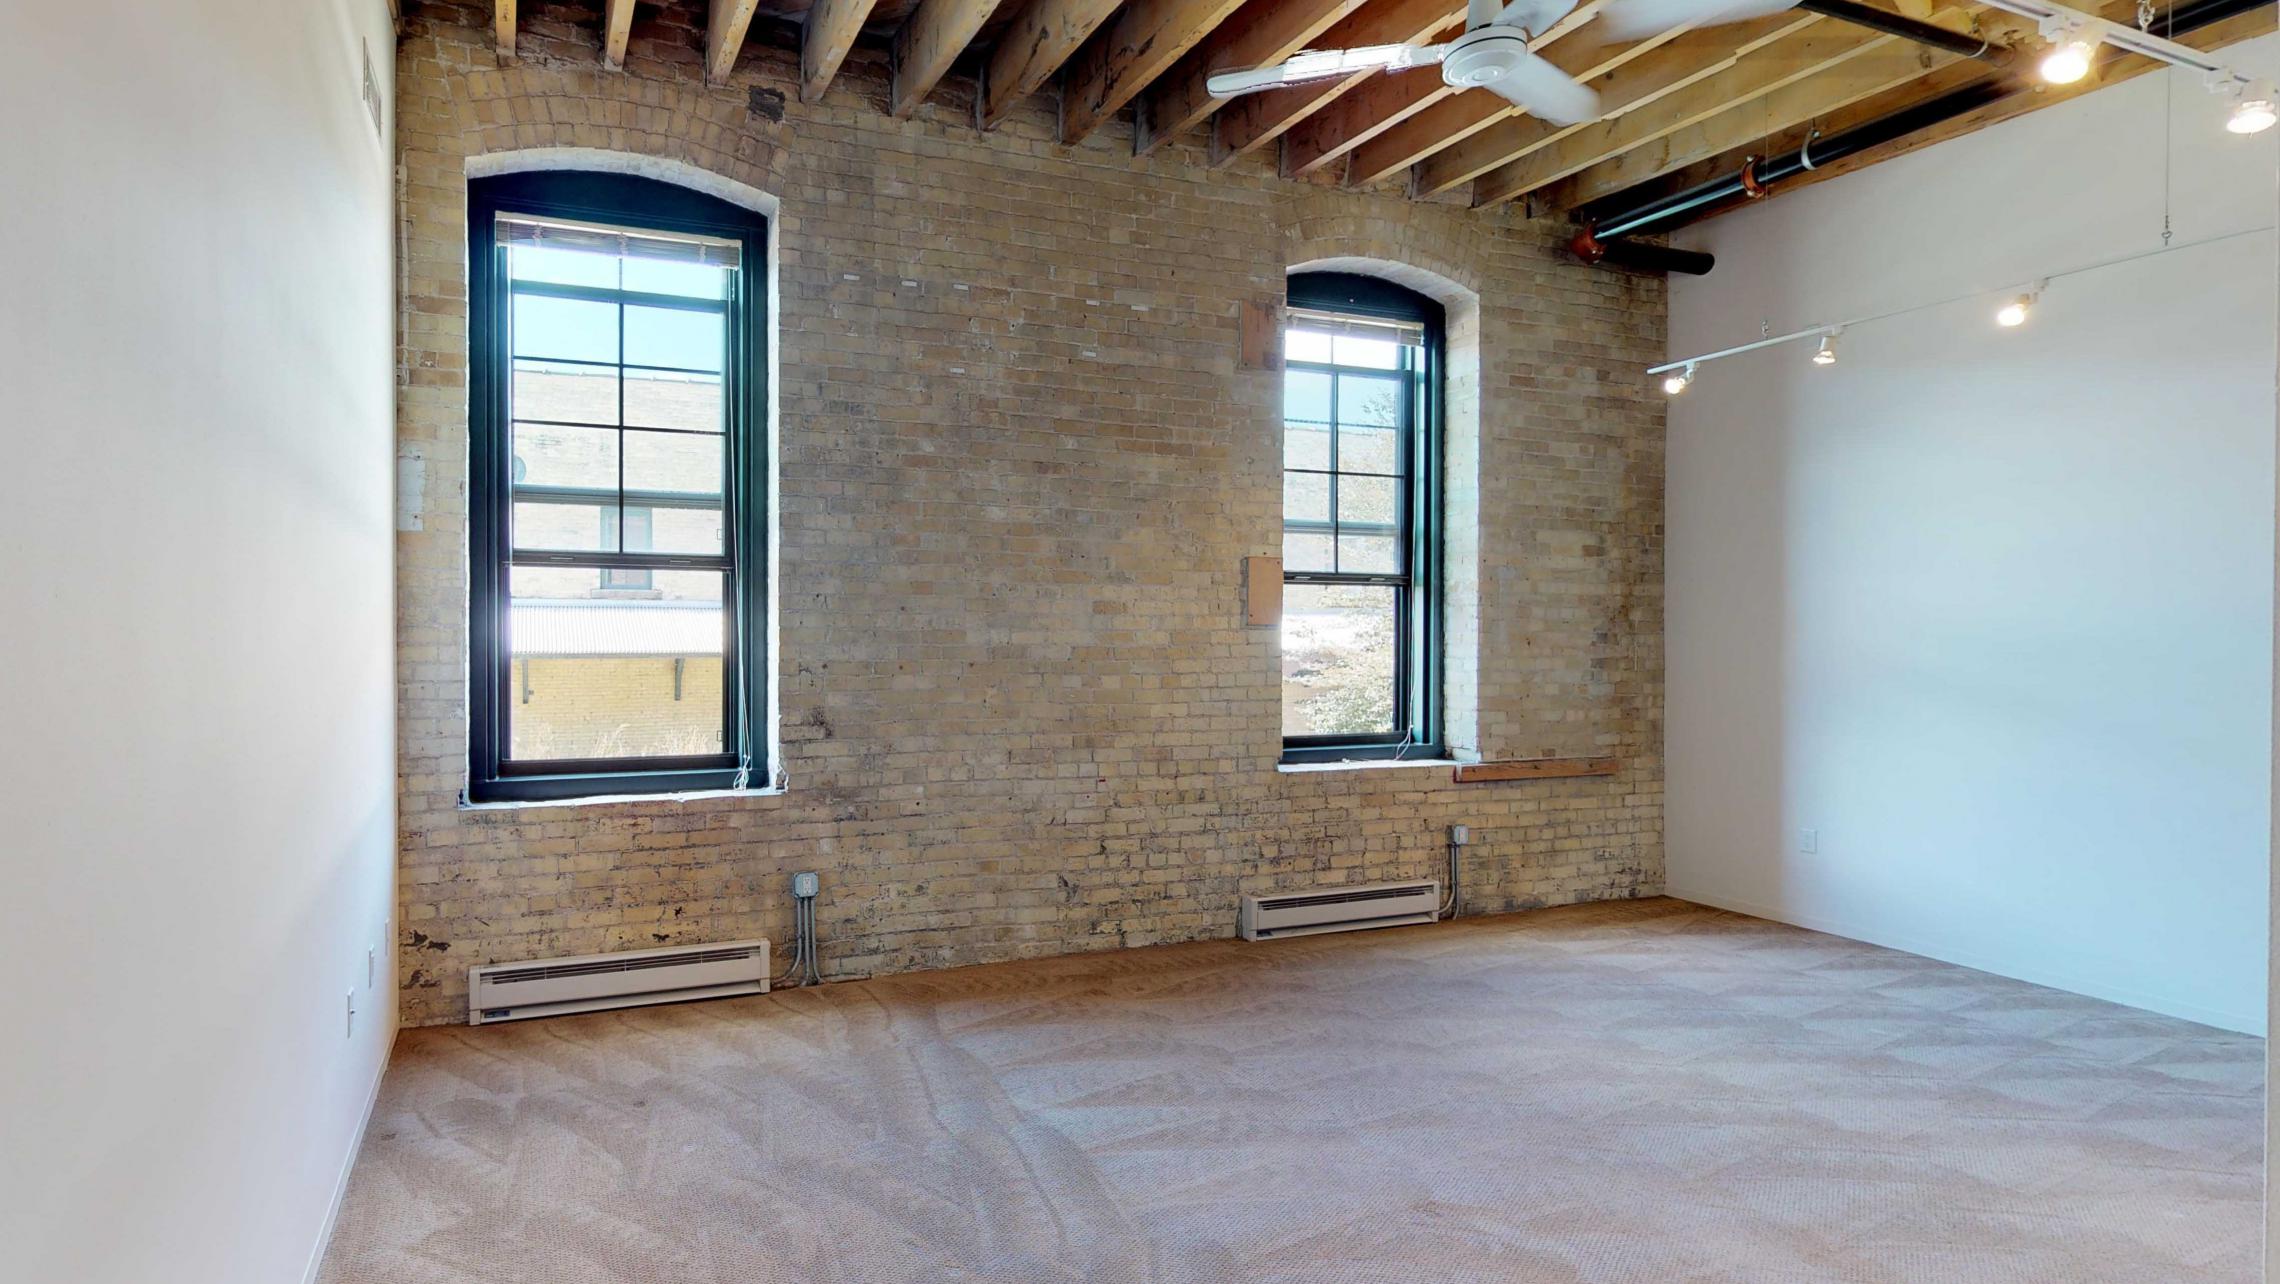 Tobacco-Lofts-Apartment-E210-one-bedroom-historic-exposed-brick-downtown-Madison